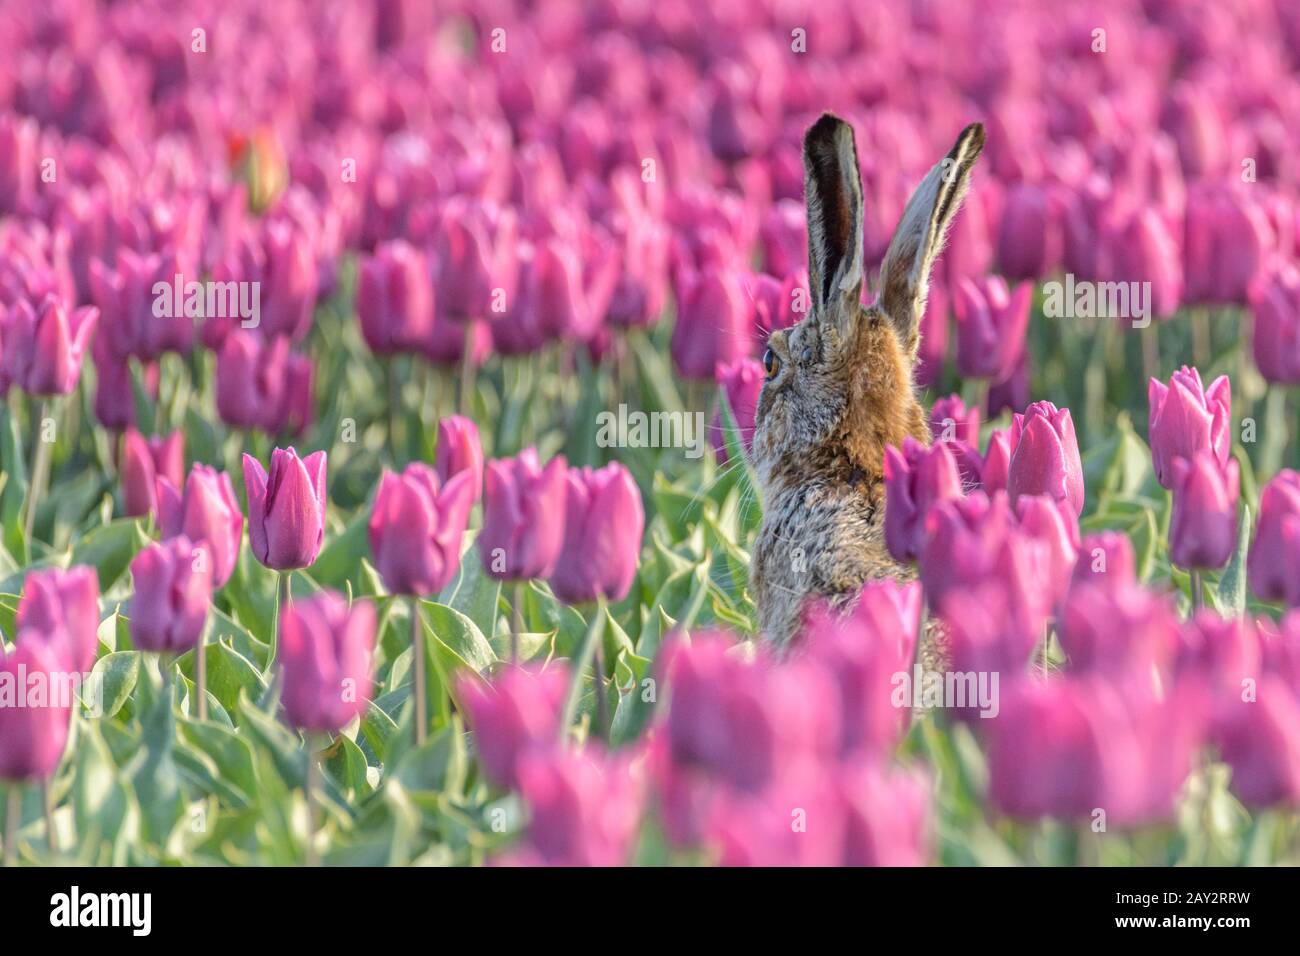 A hare (lepus europaeus) is sitting up in a field looking over purple flowering tulips during spring in the Netherlands. Stock Photo